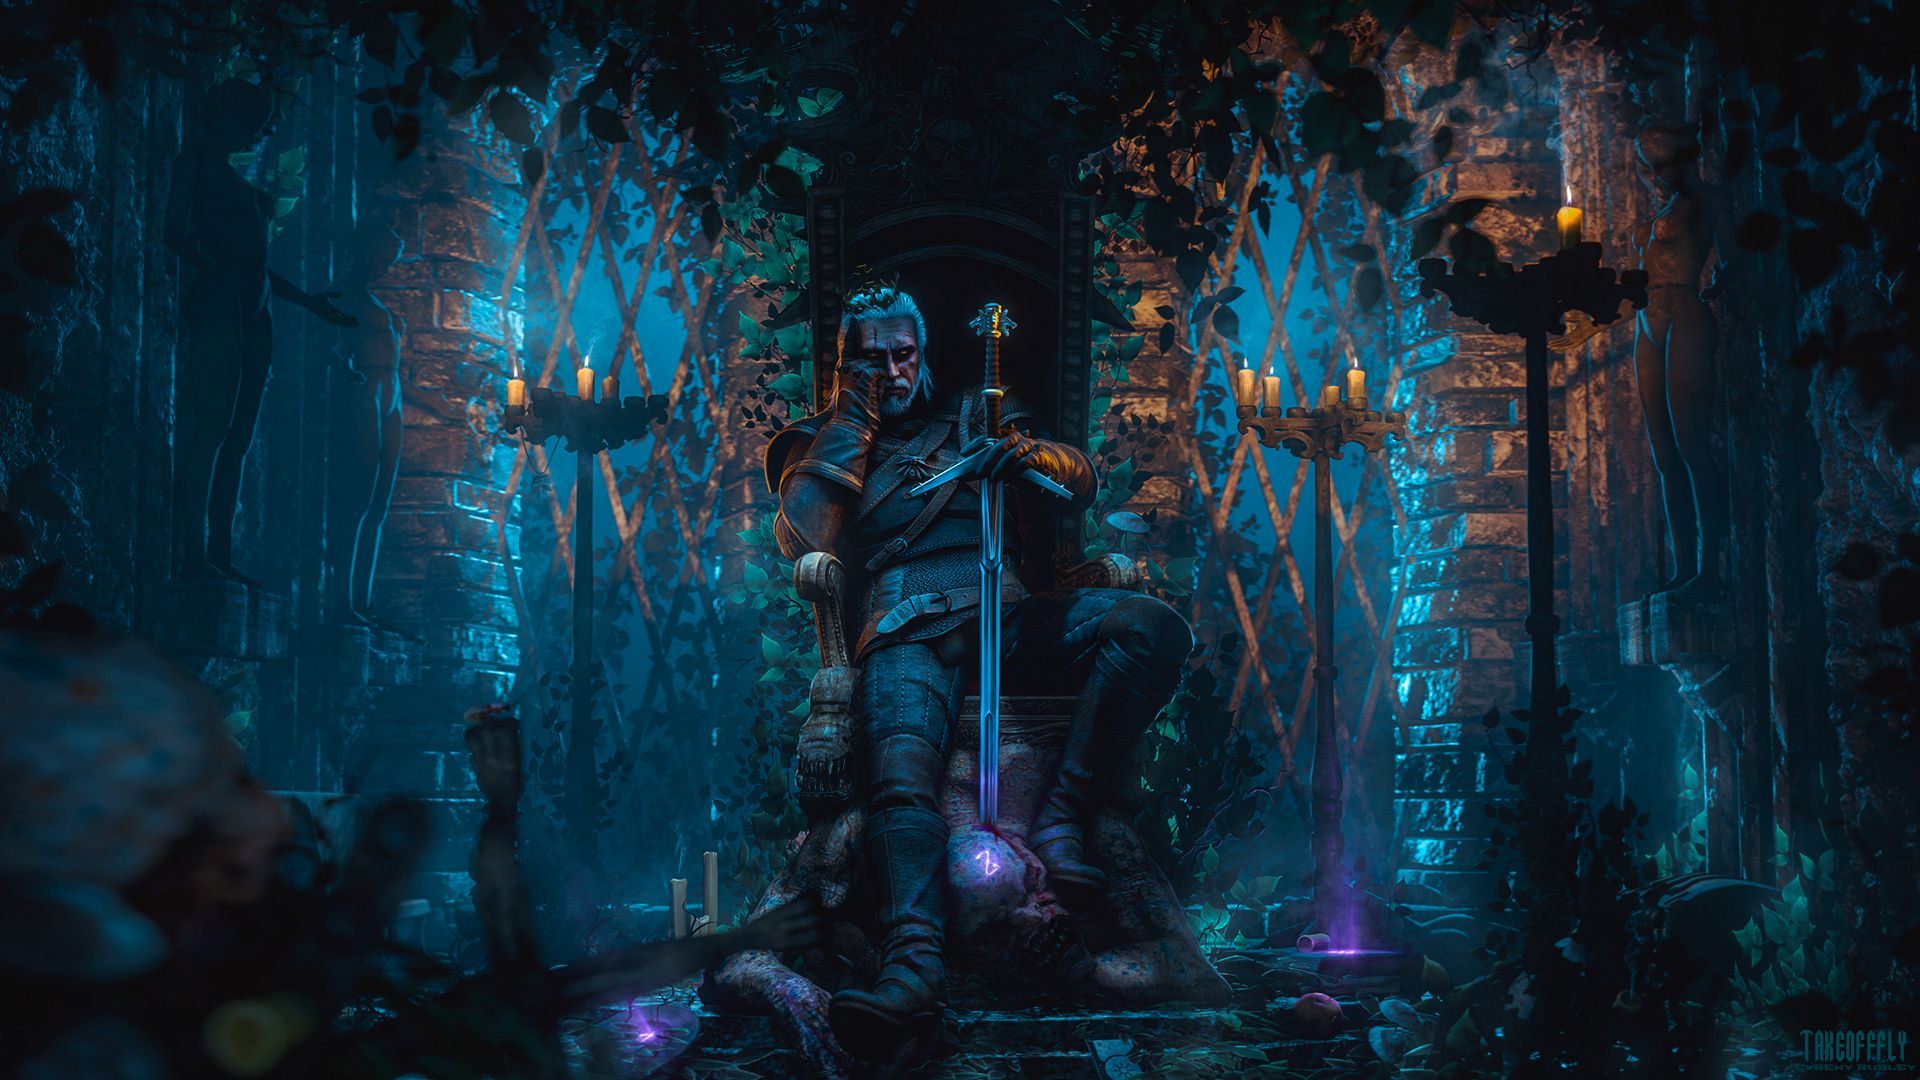 Full HD Wallpaper the witcher 3: wild hunt, the witcher, night, video game, geralt of rivia, sword, warrior